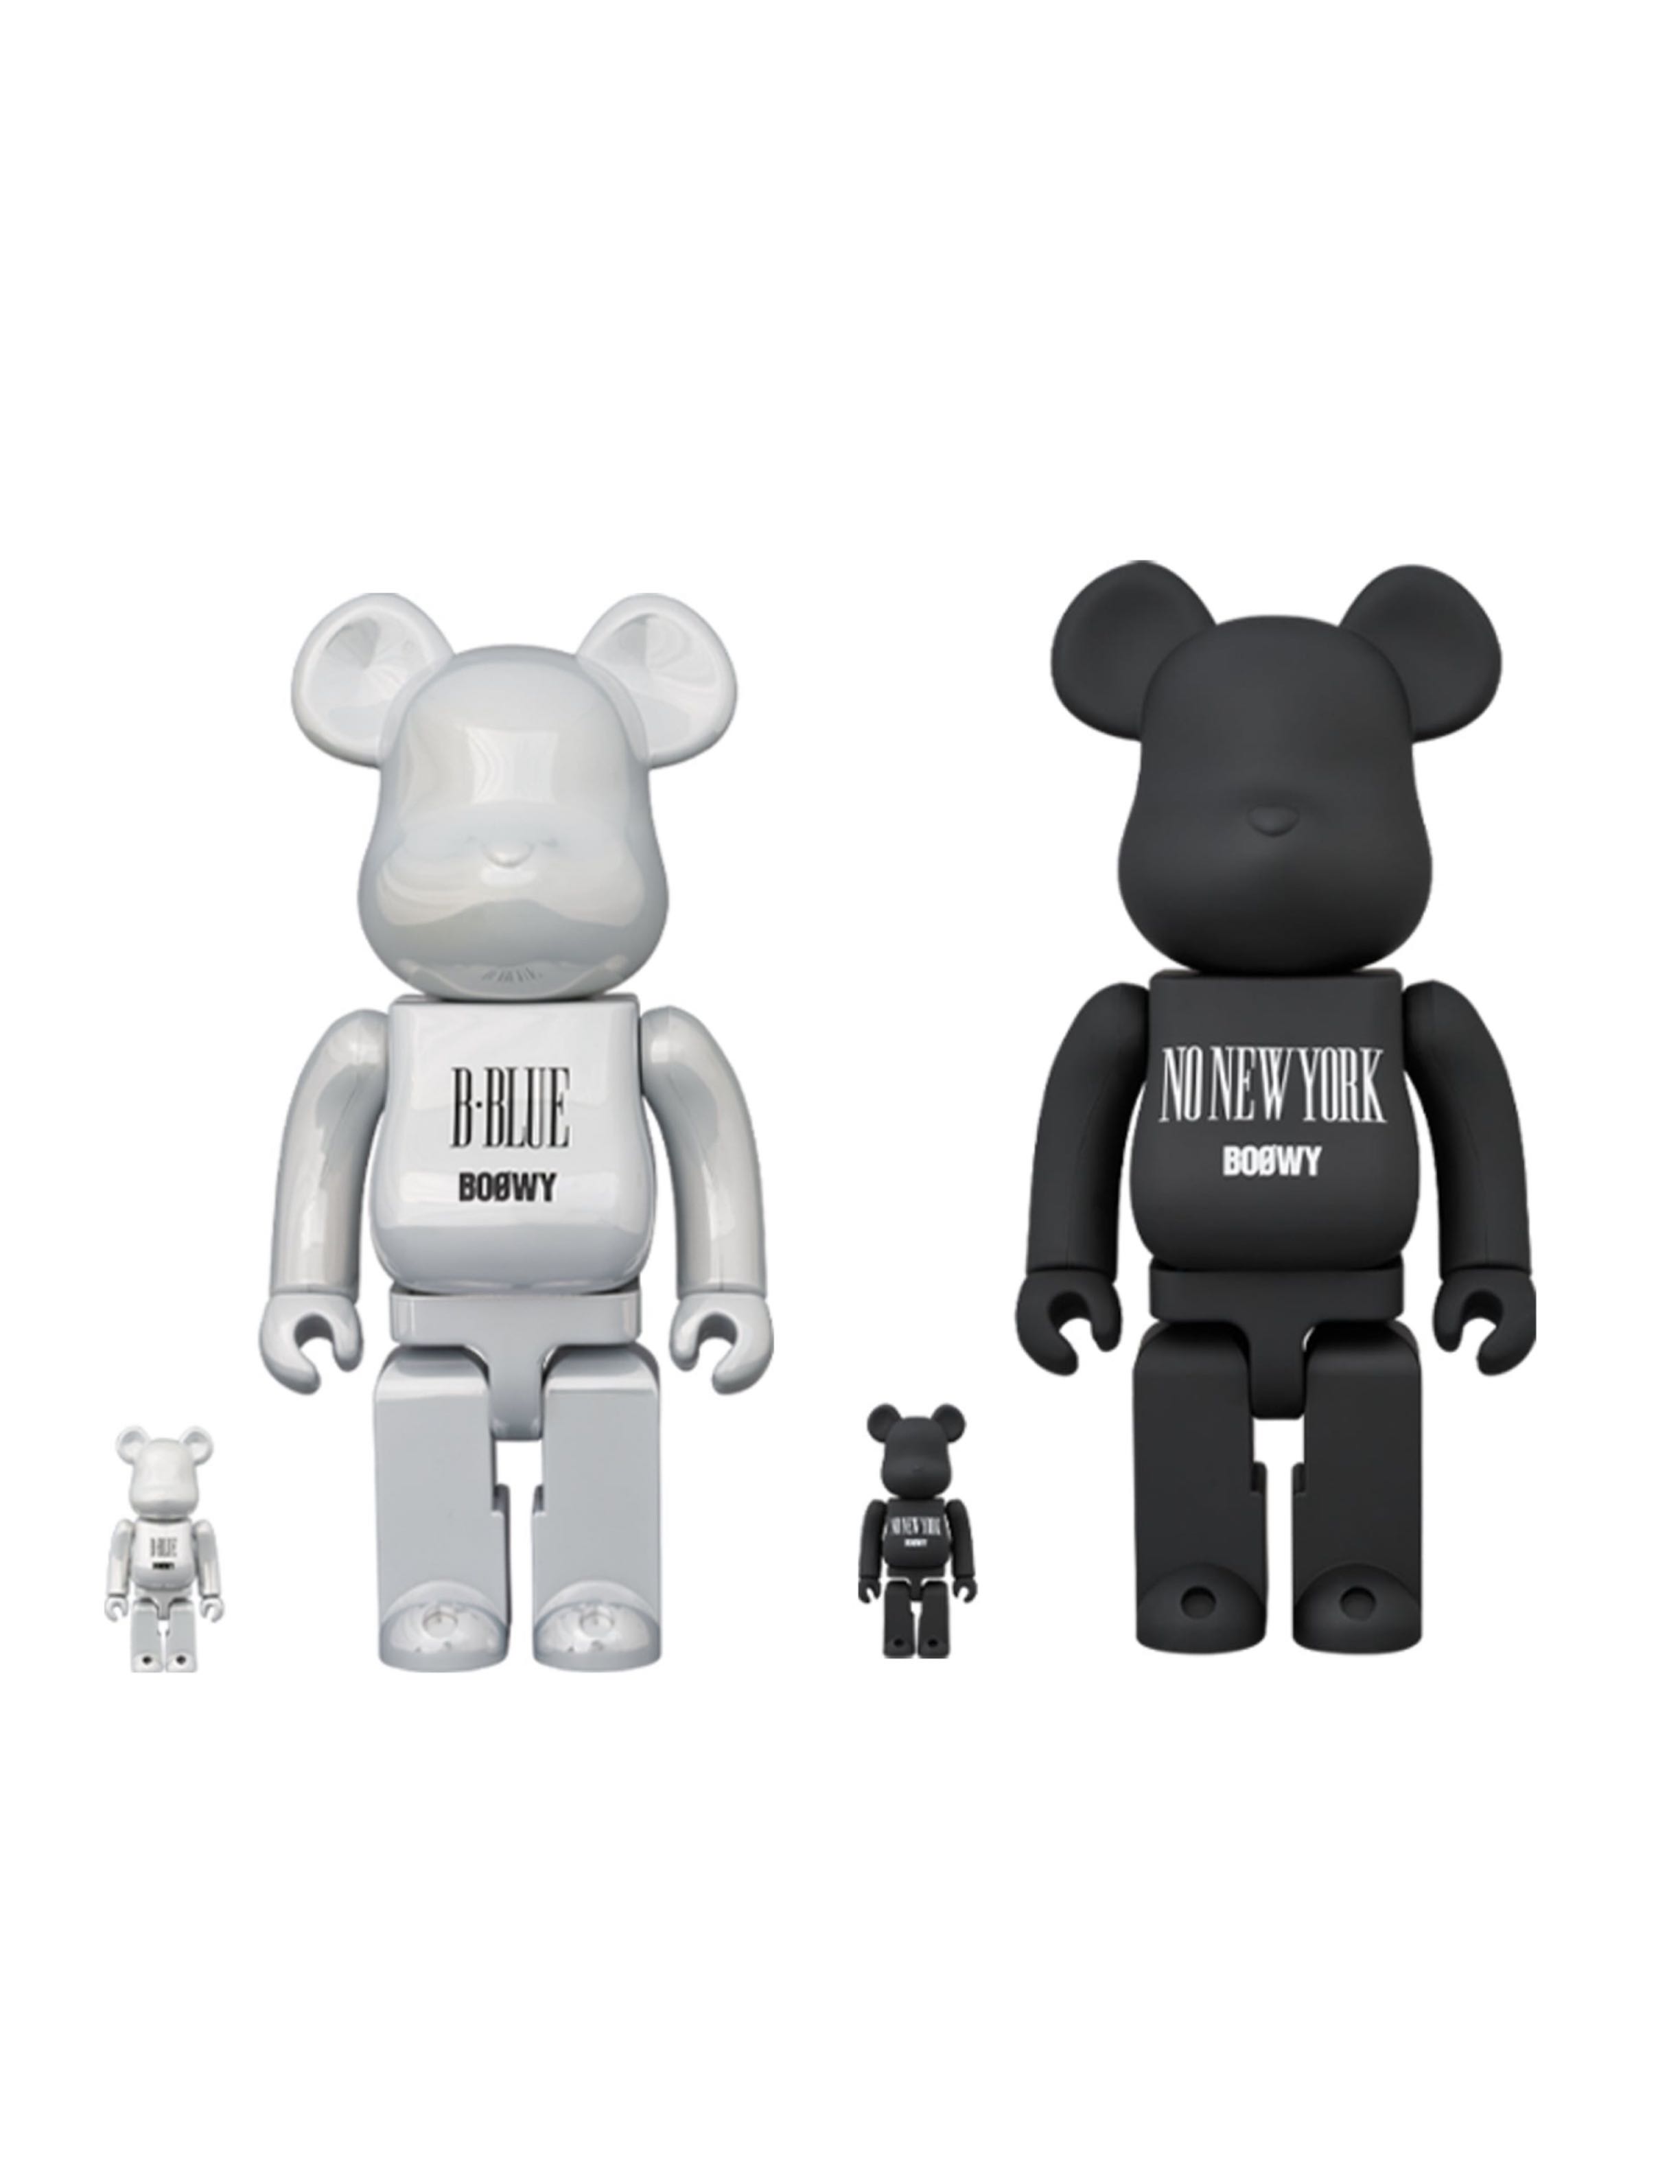 In Stock] BE@RBRICK x Boowy No New York + B Blue 400%&100% Set